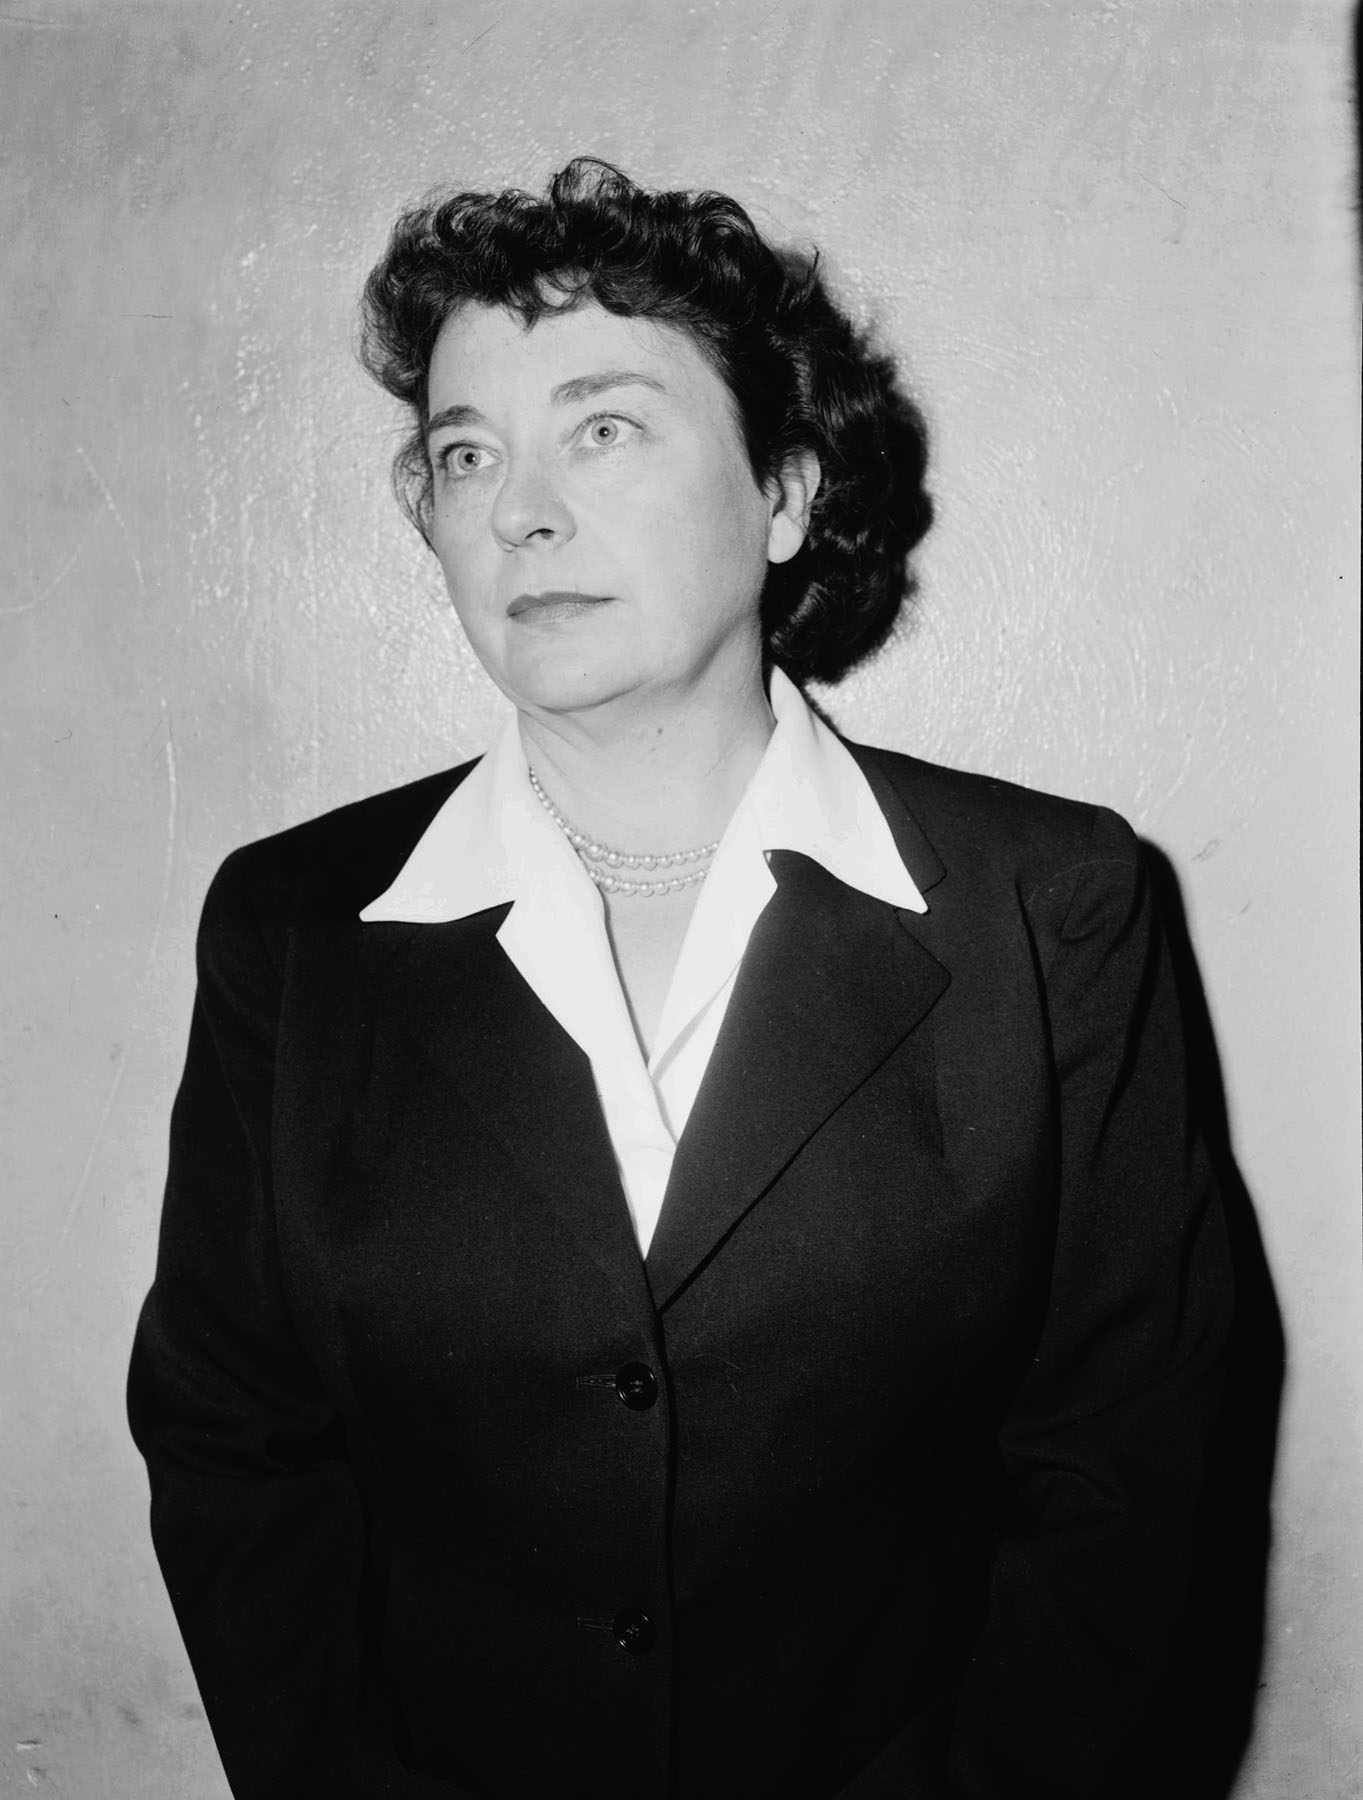 Black-and-white photo of a woman wearing a suit.